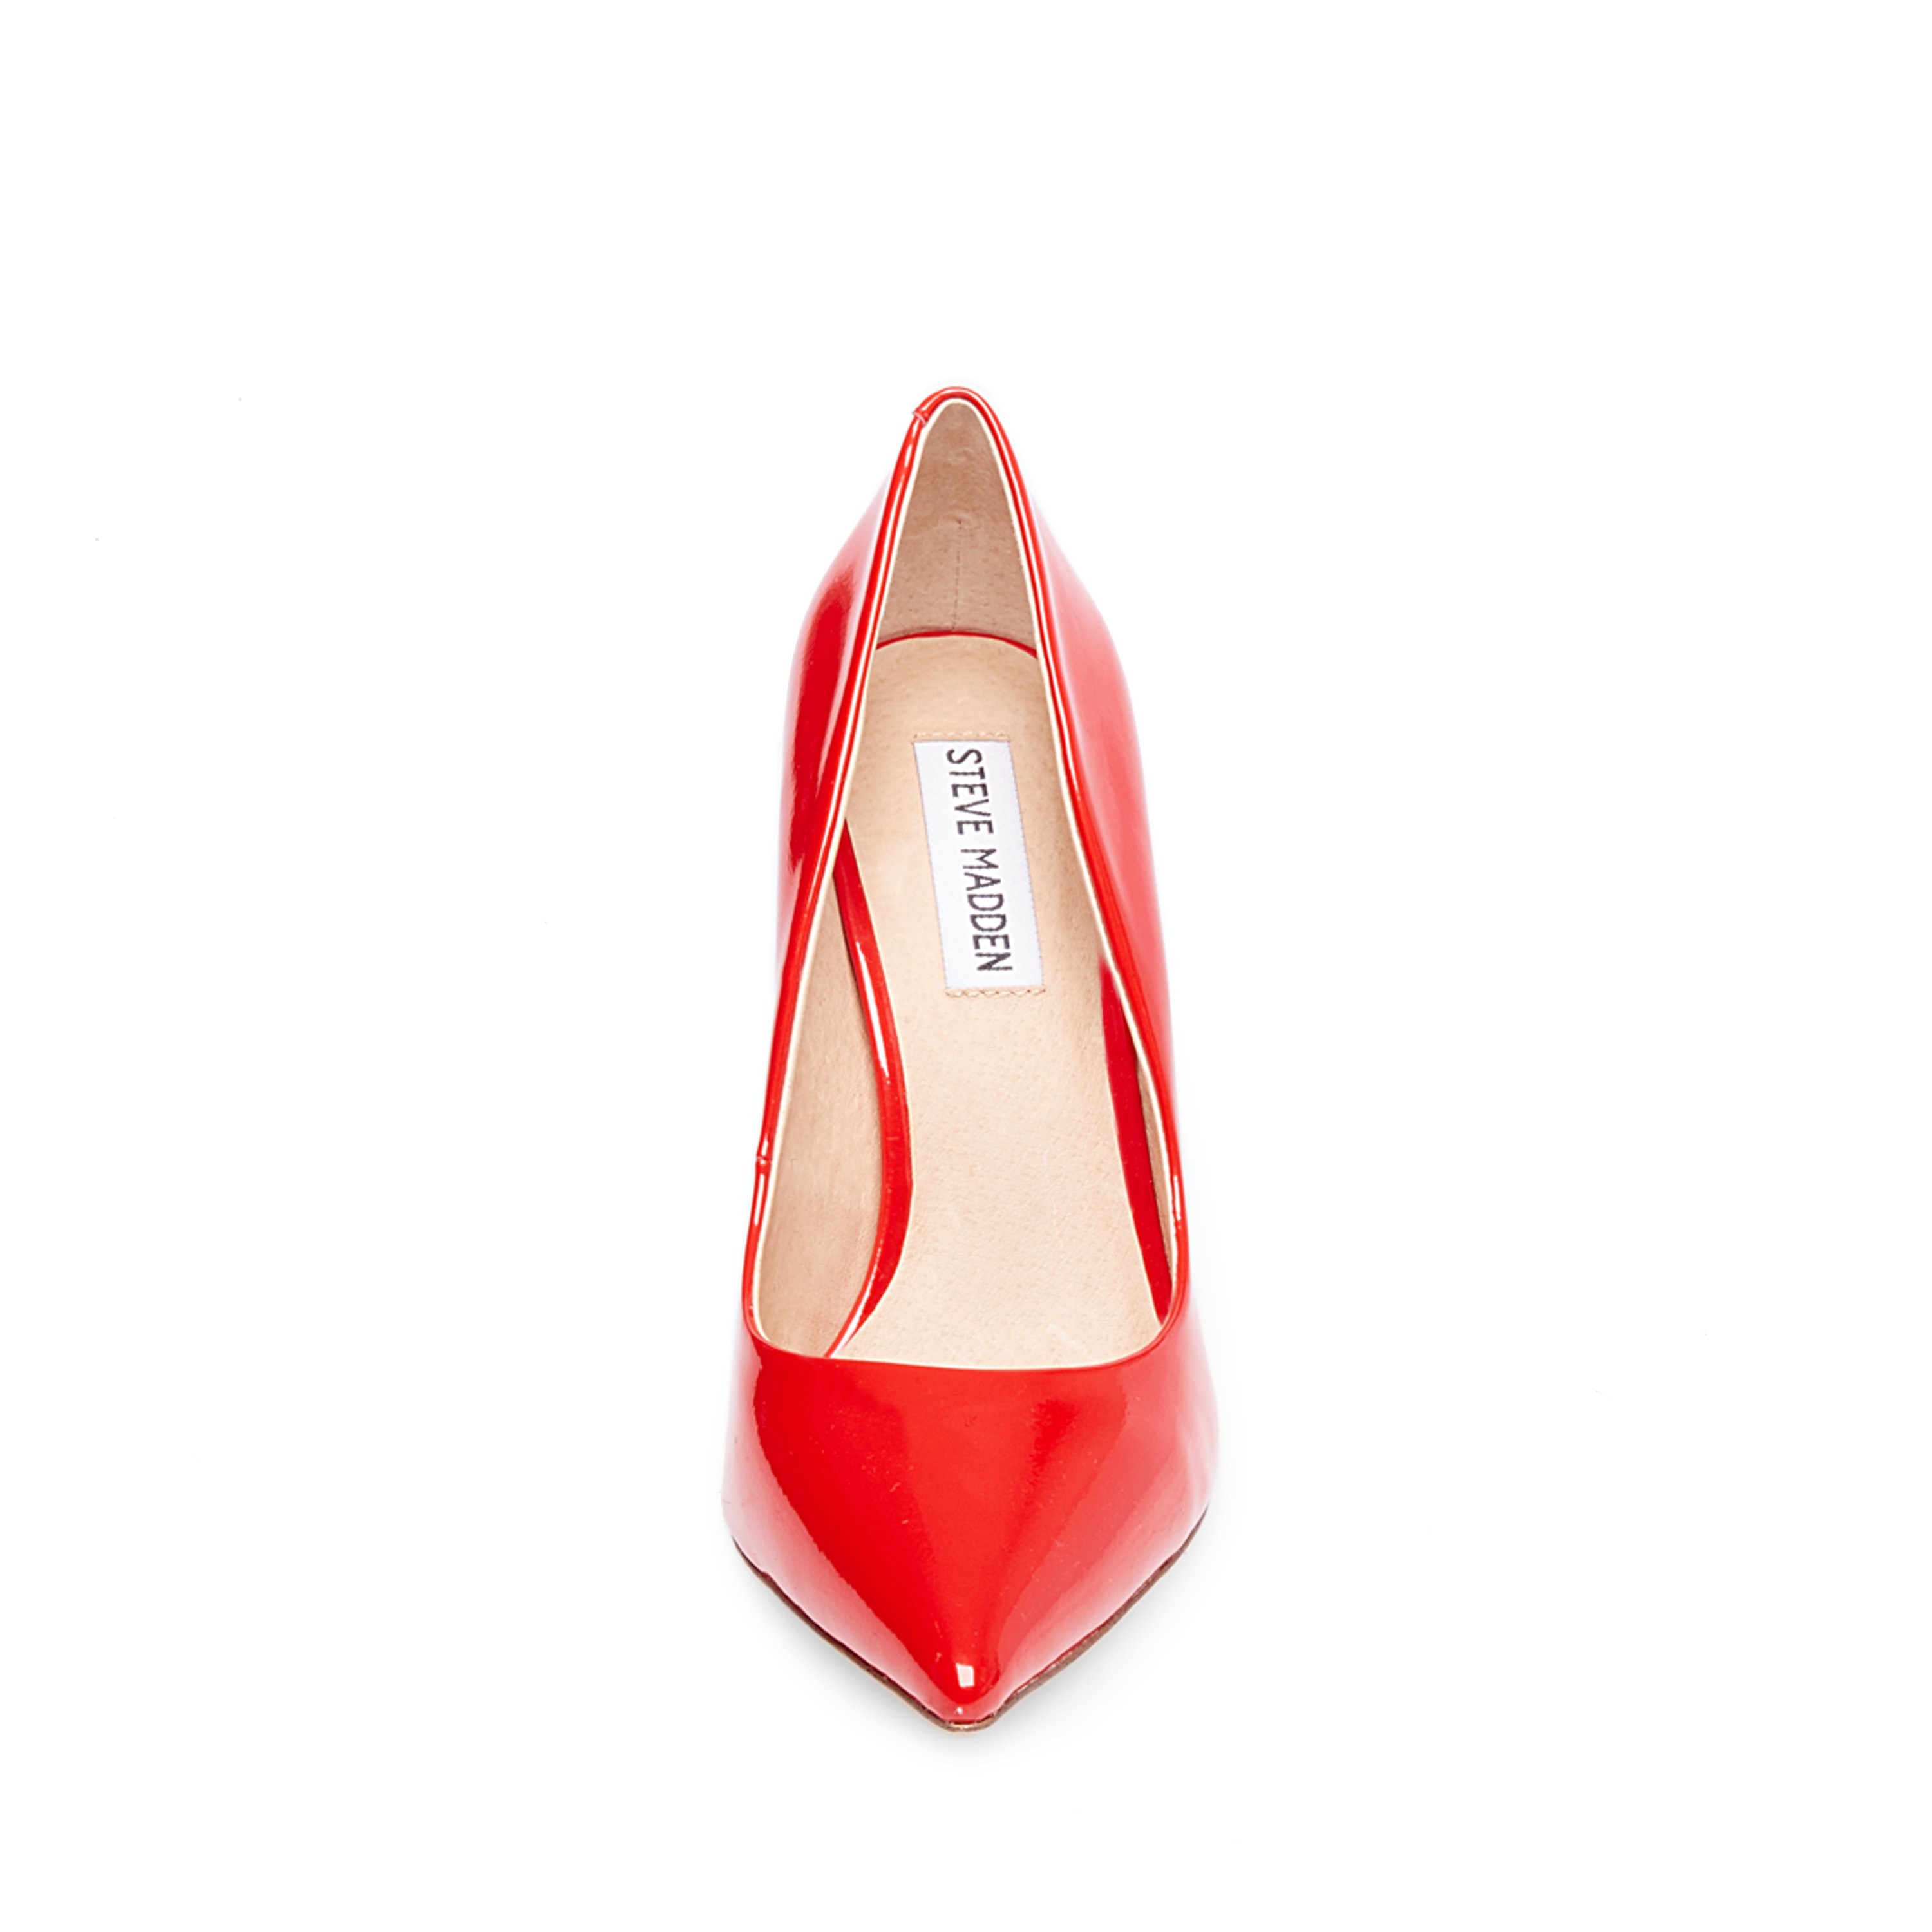 Steve Madden Daisie Pump Red SM91000743 07003 03001 - New Collection Fall Winter 2018 2019